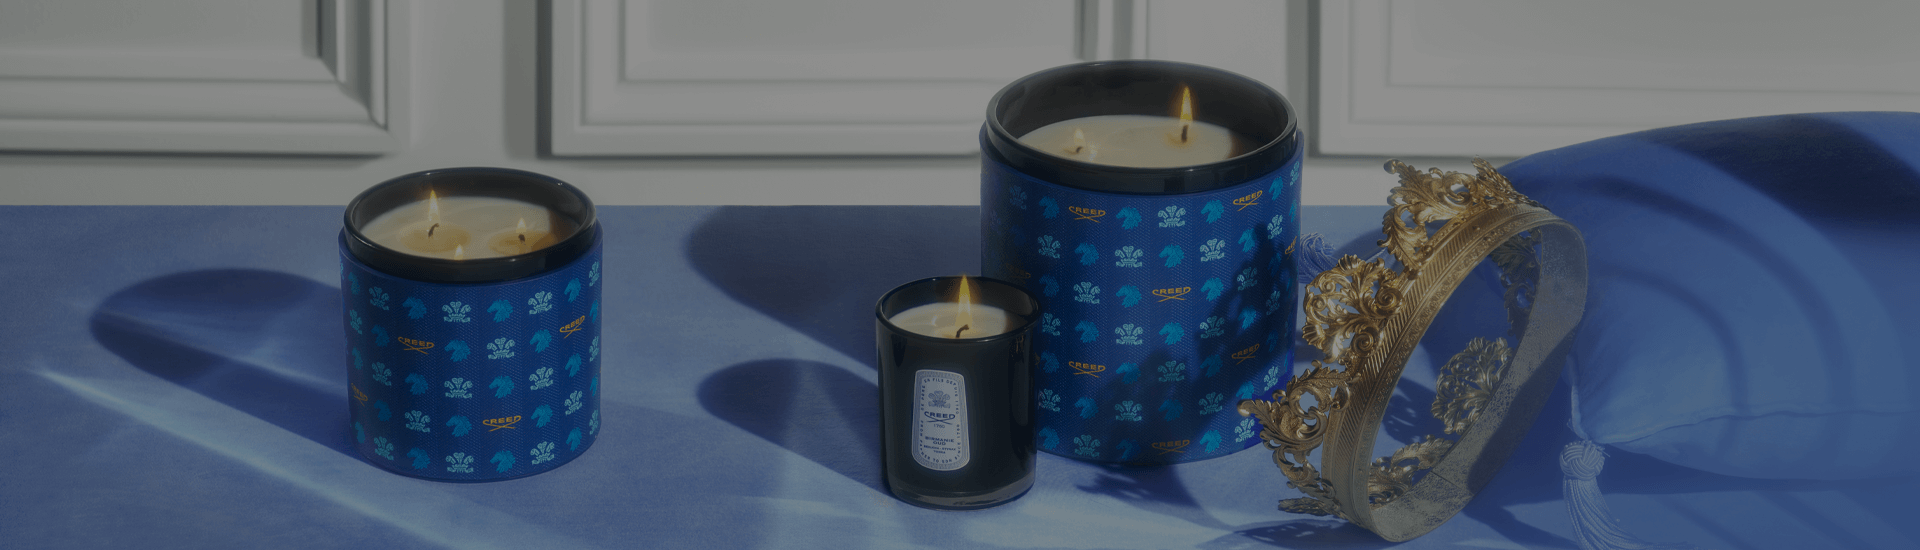 Creed small candle and medium & large leather candles next to crown